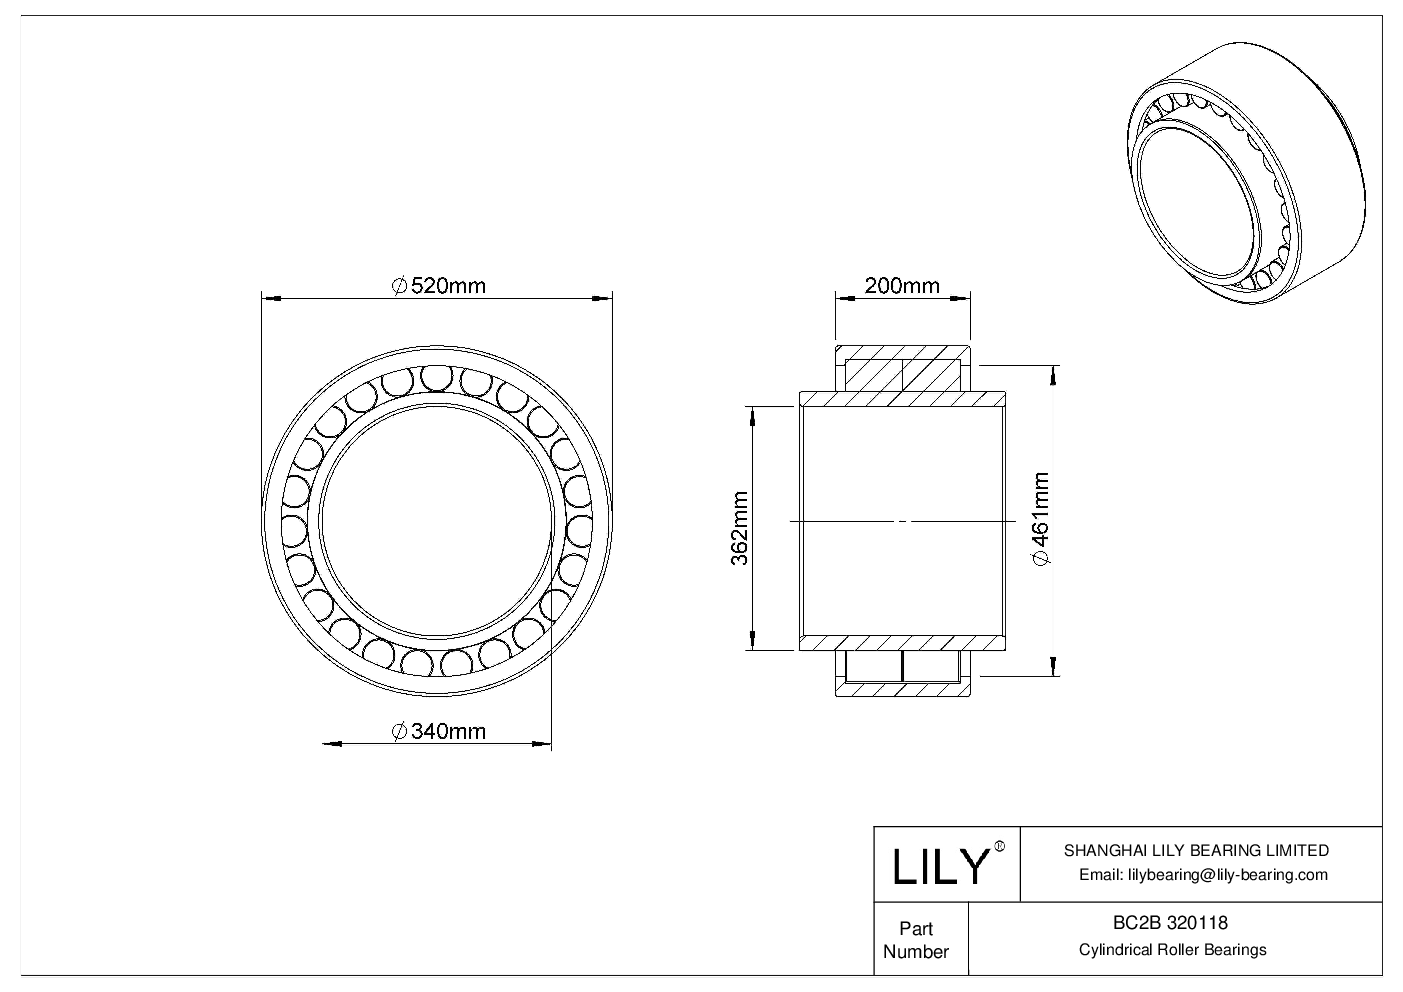 BC2B 320118 Double Row Cylindrical Roller Bearings cad drawing